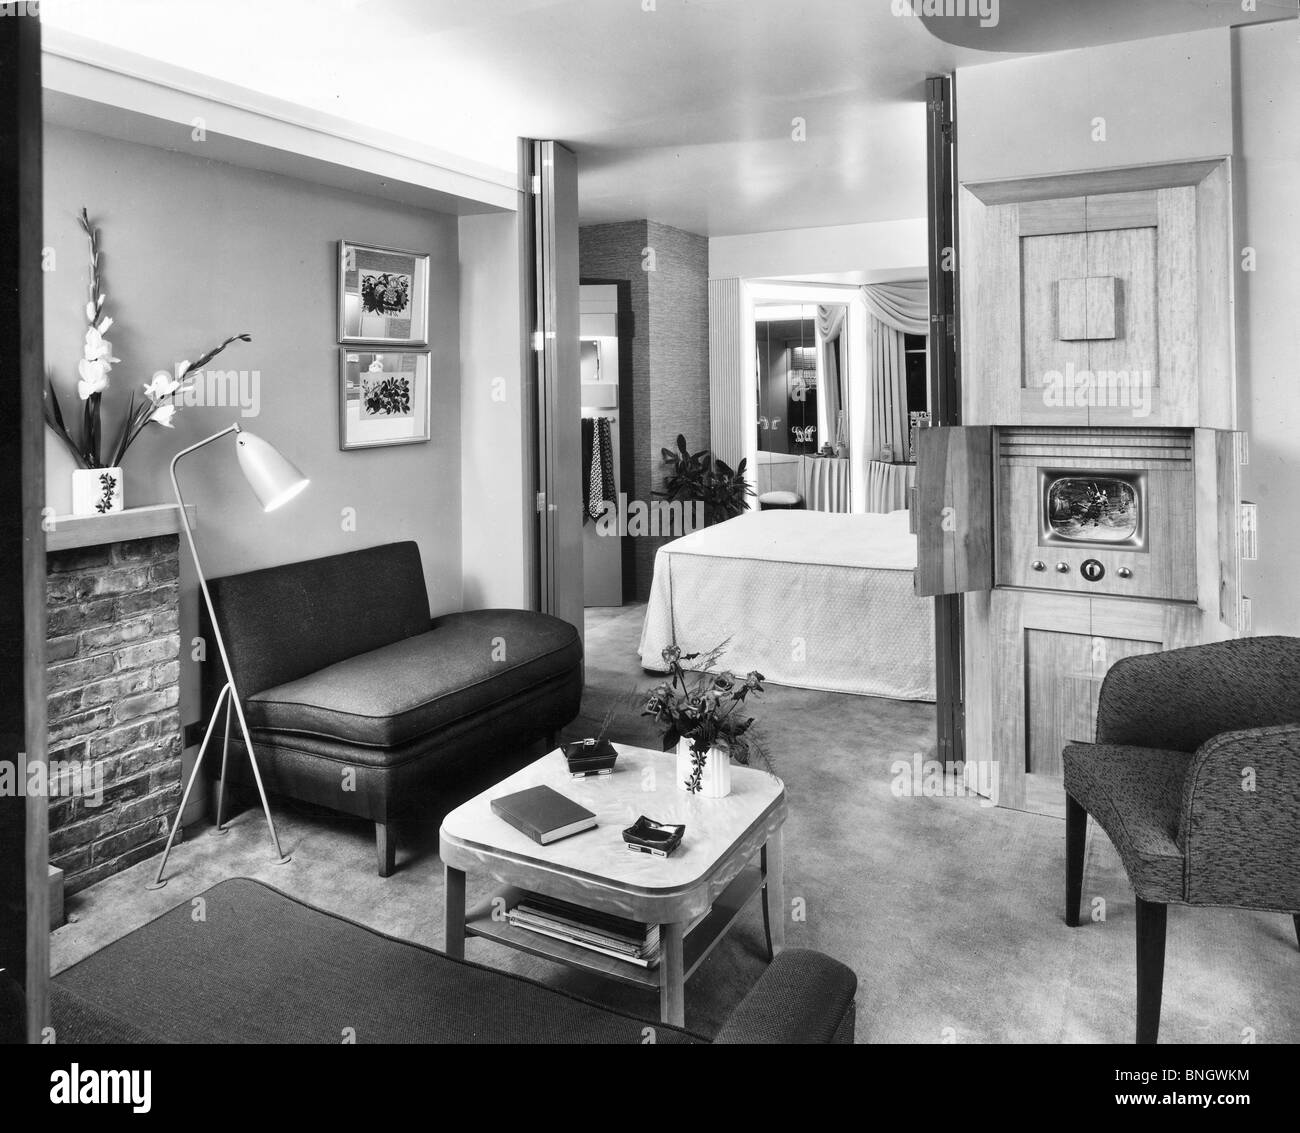 Interior Of A Living Room 1950s Style Stock Photo 30489528